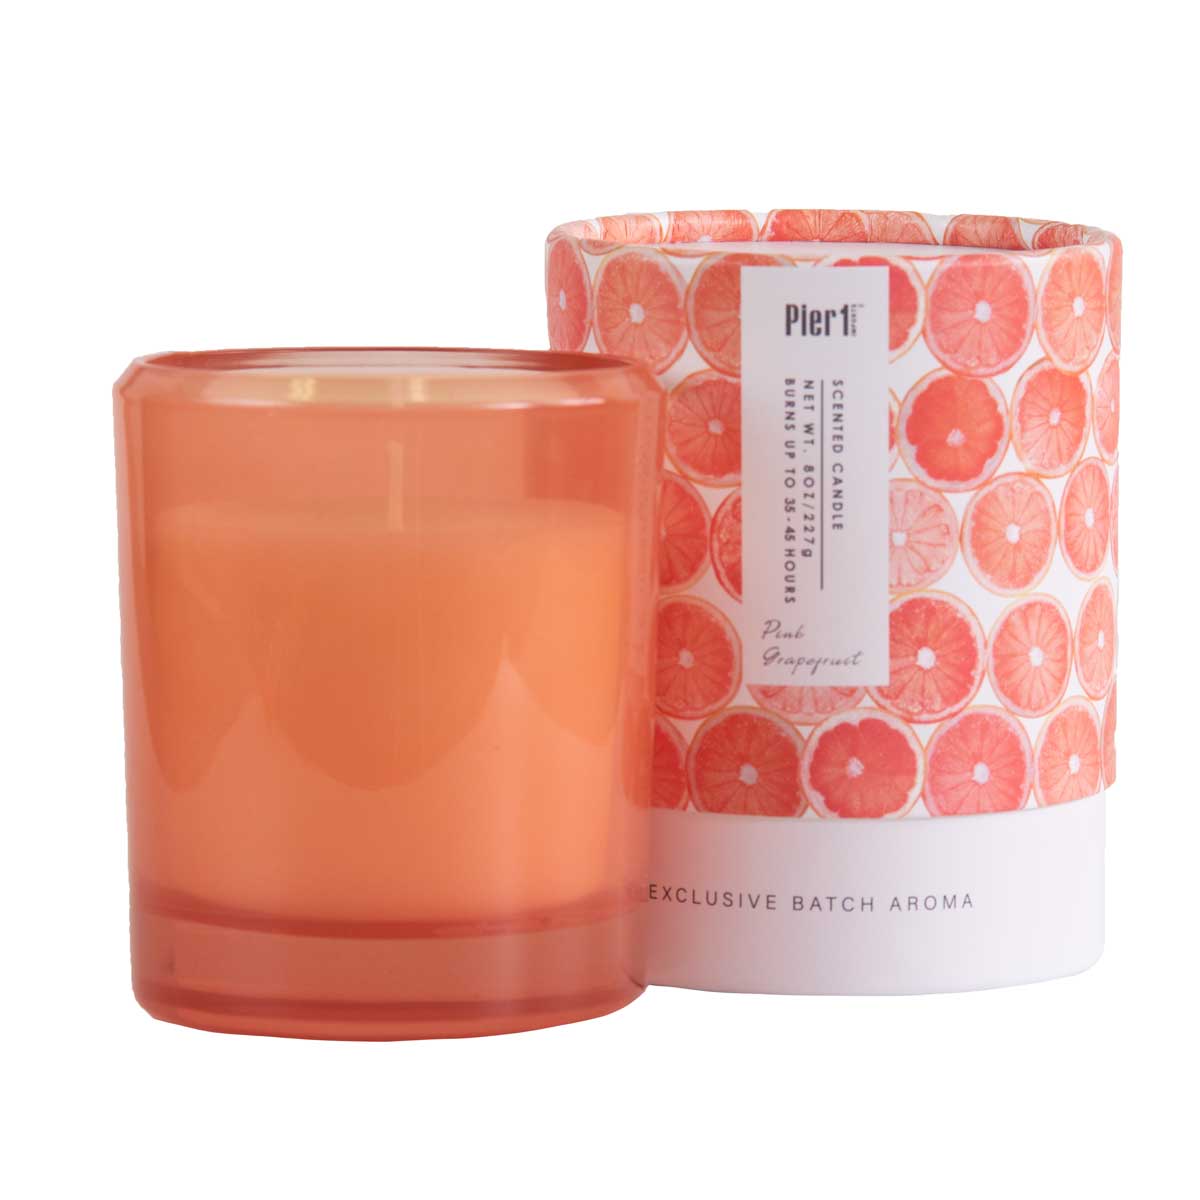 Pier-1-Pink-Grapefruit-8oz-Boxed-Soy-Candle-Candles